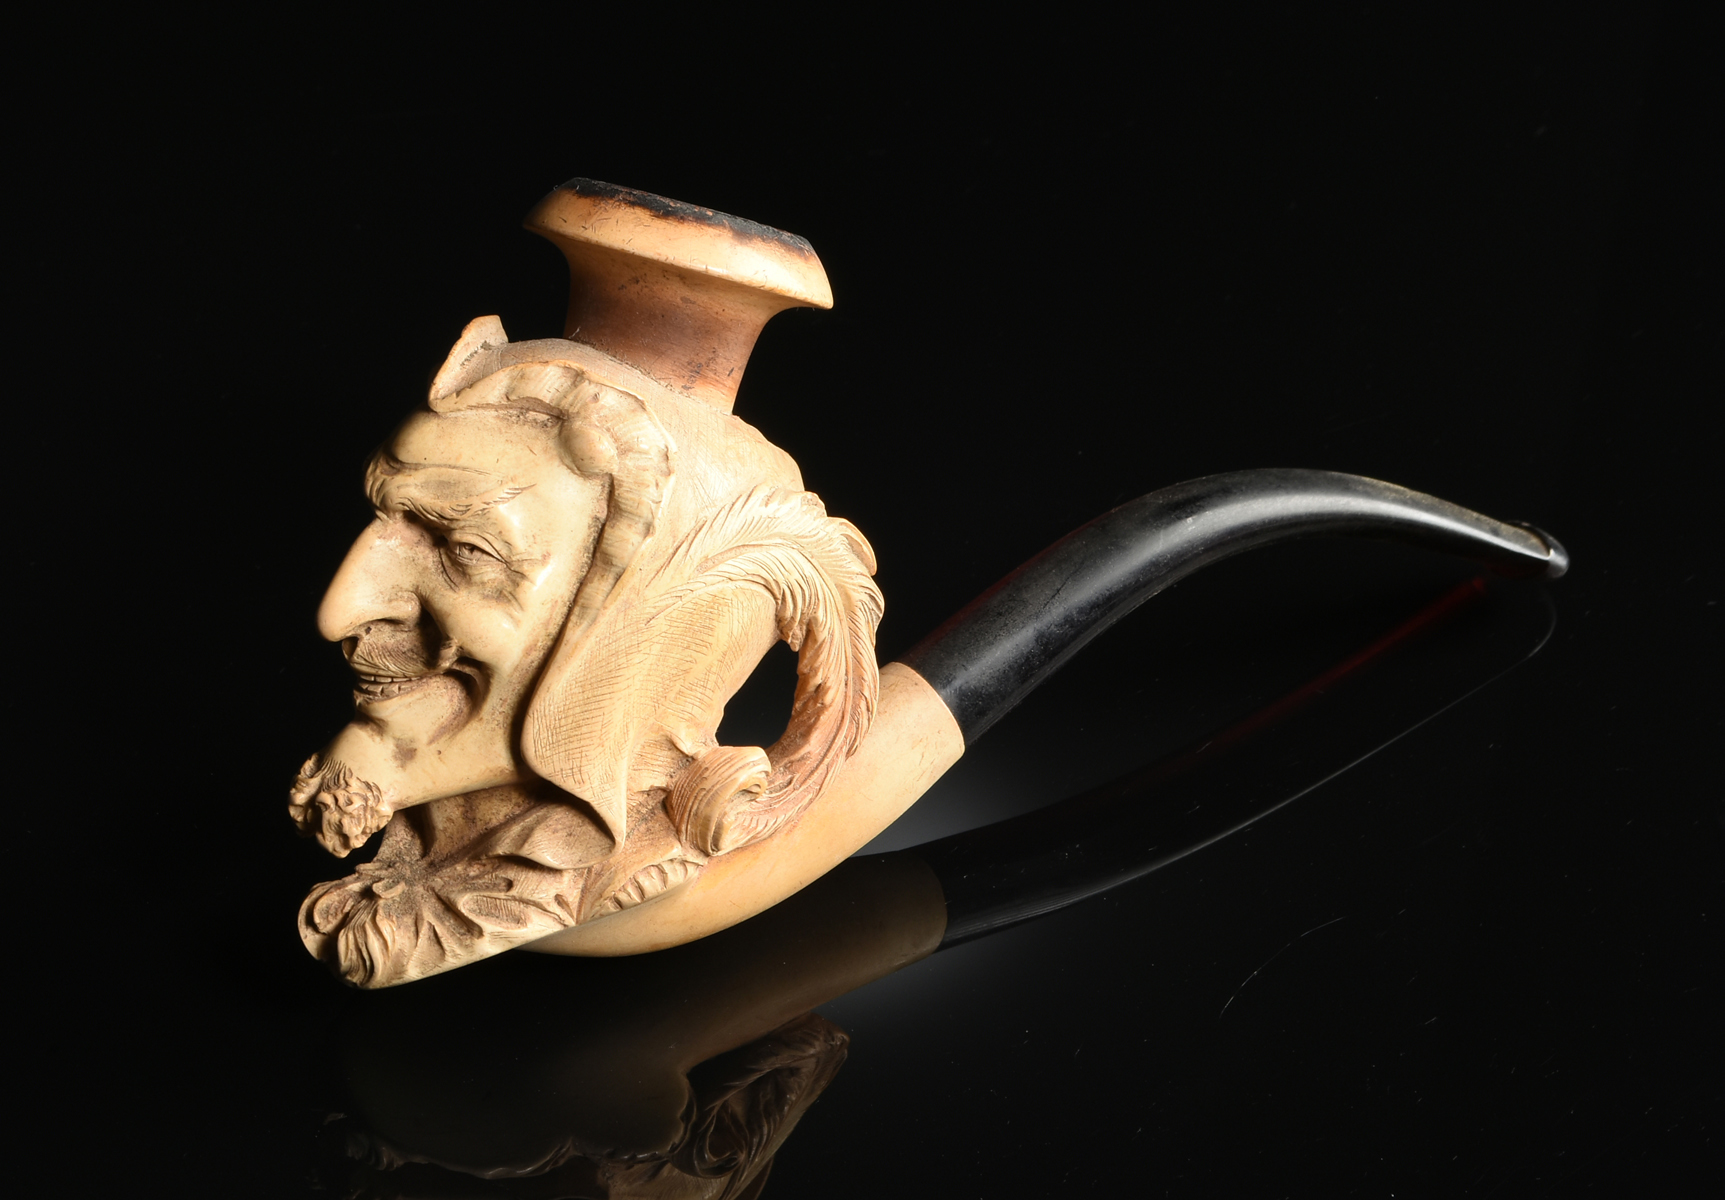 TWO MEERSCHAUM PORTRAIT TOBACCO PIPES, LATE 19TH/EARLY 20TH CENTURY, carved in the form of a - Image 5 of 9